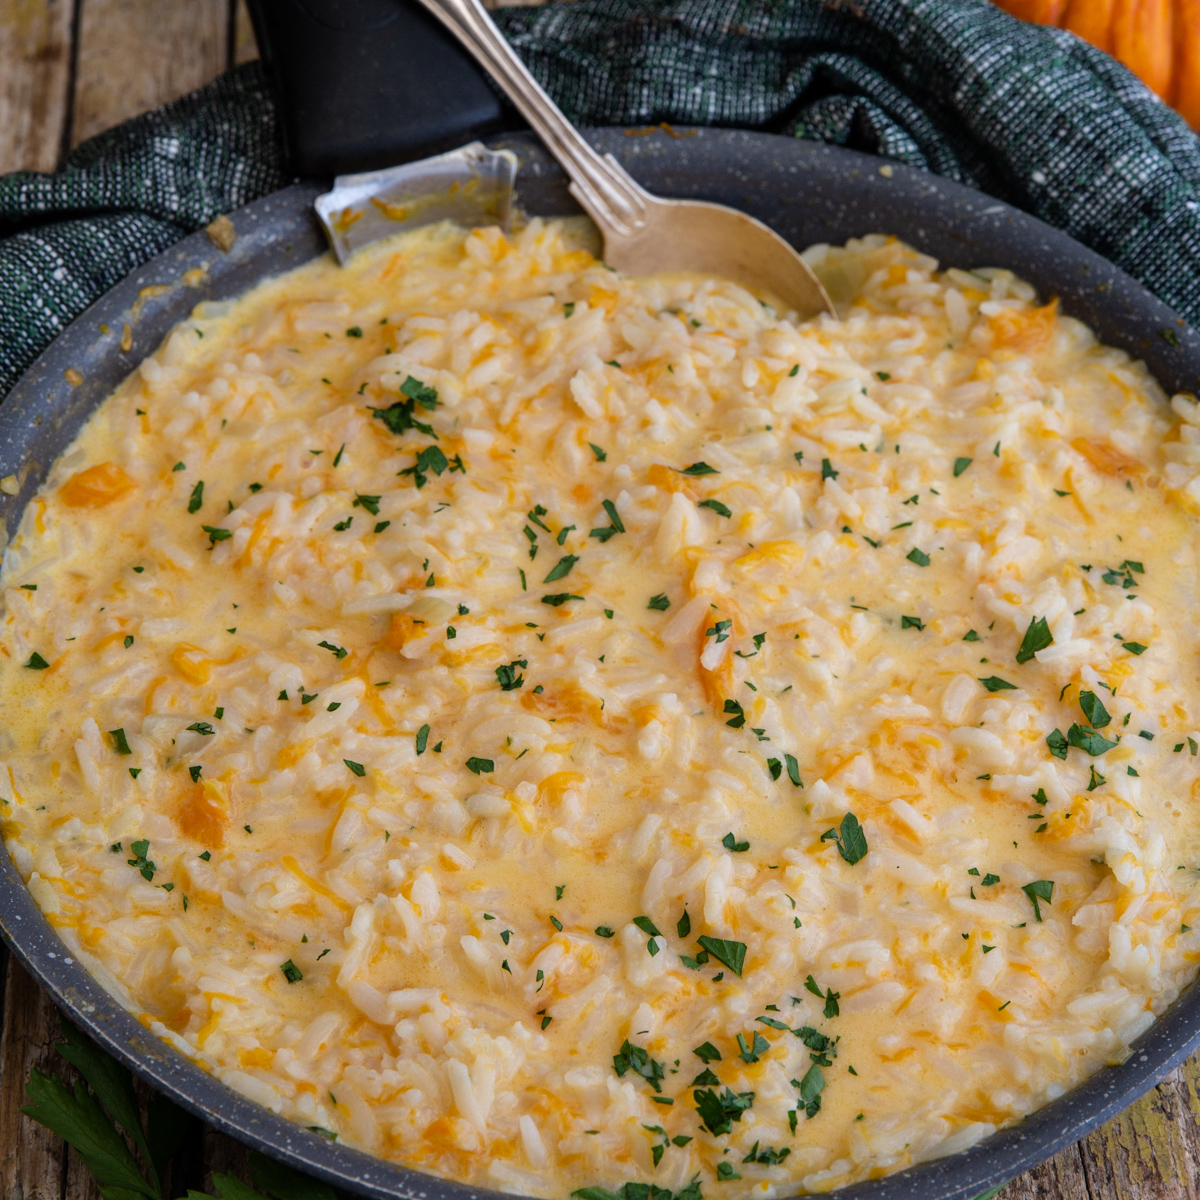 Pumpkin risotto in a black pan with a spoon.